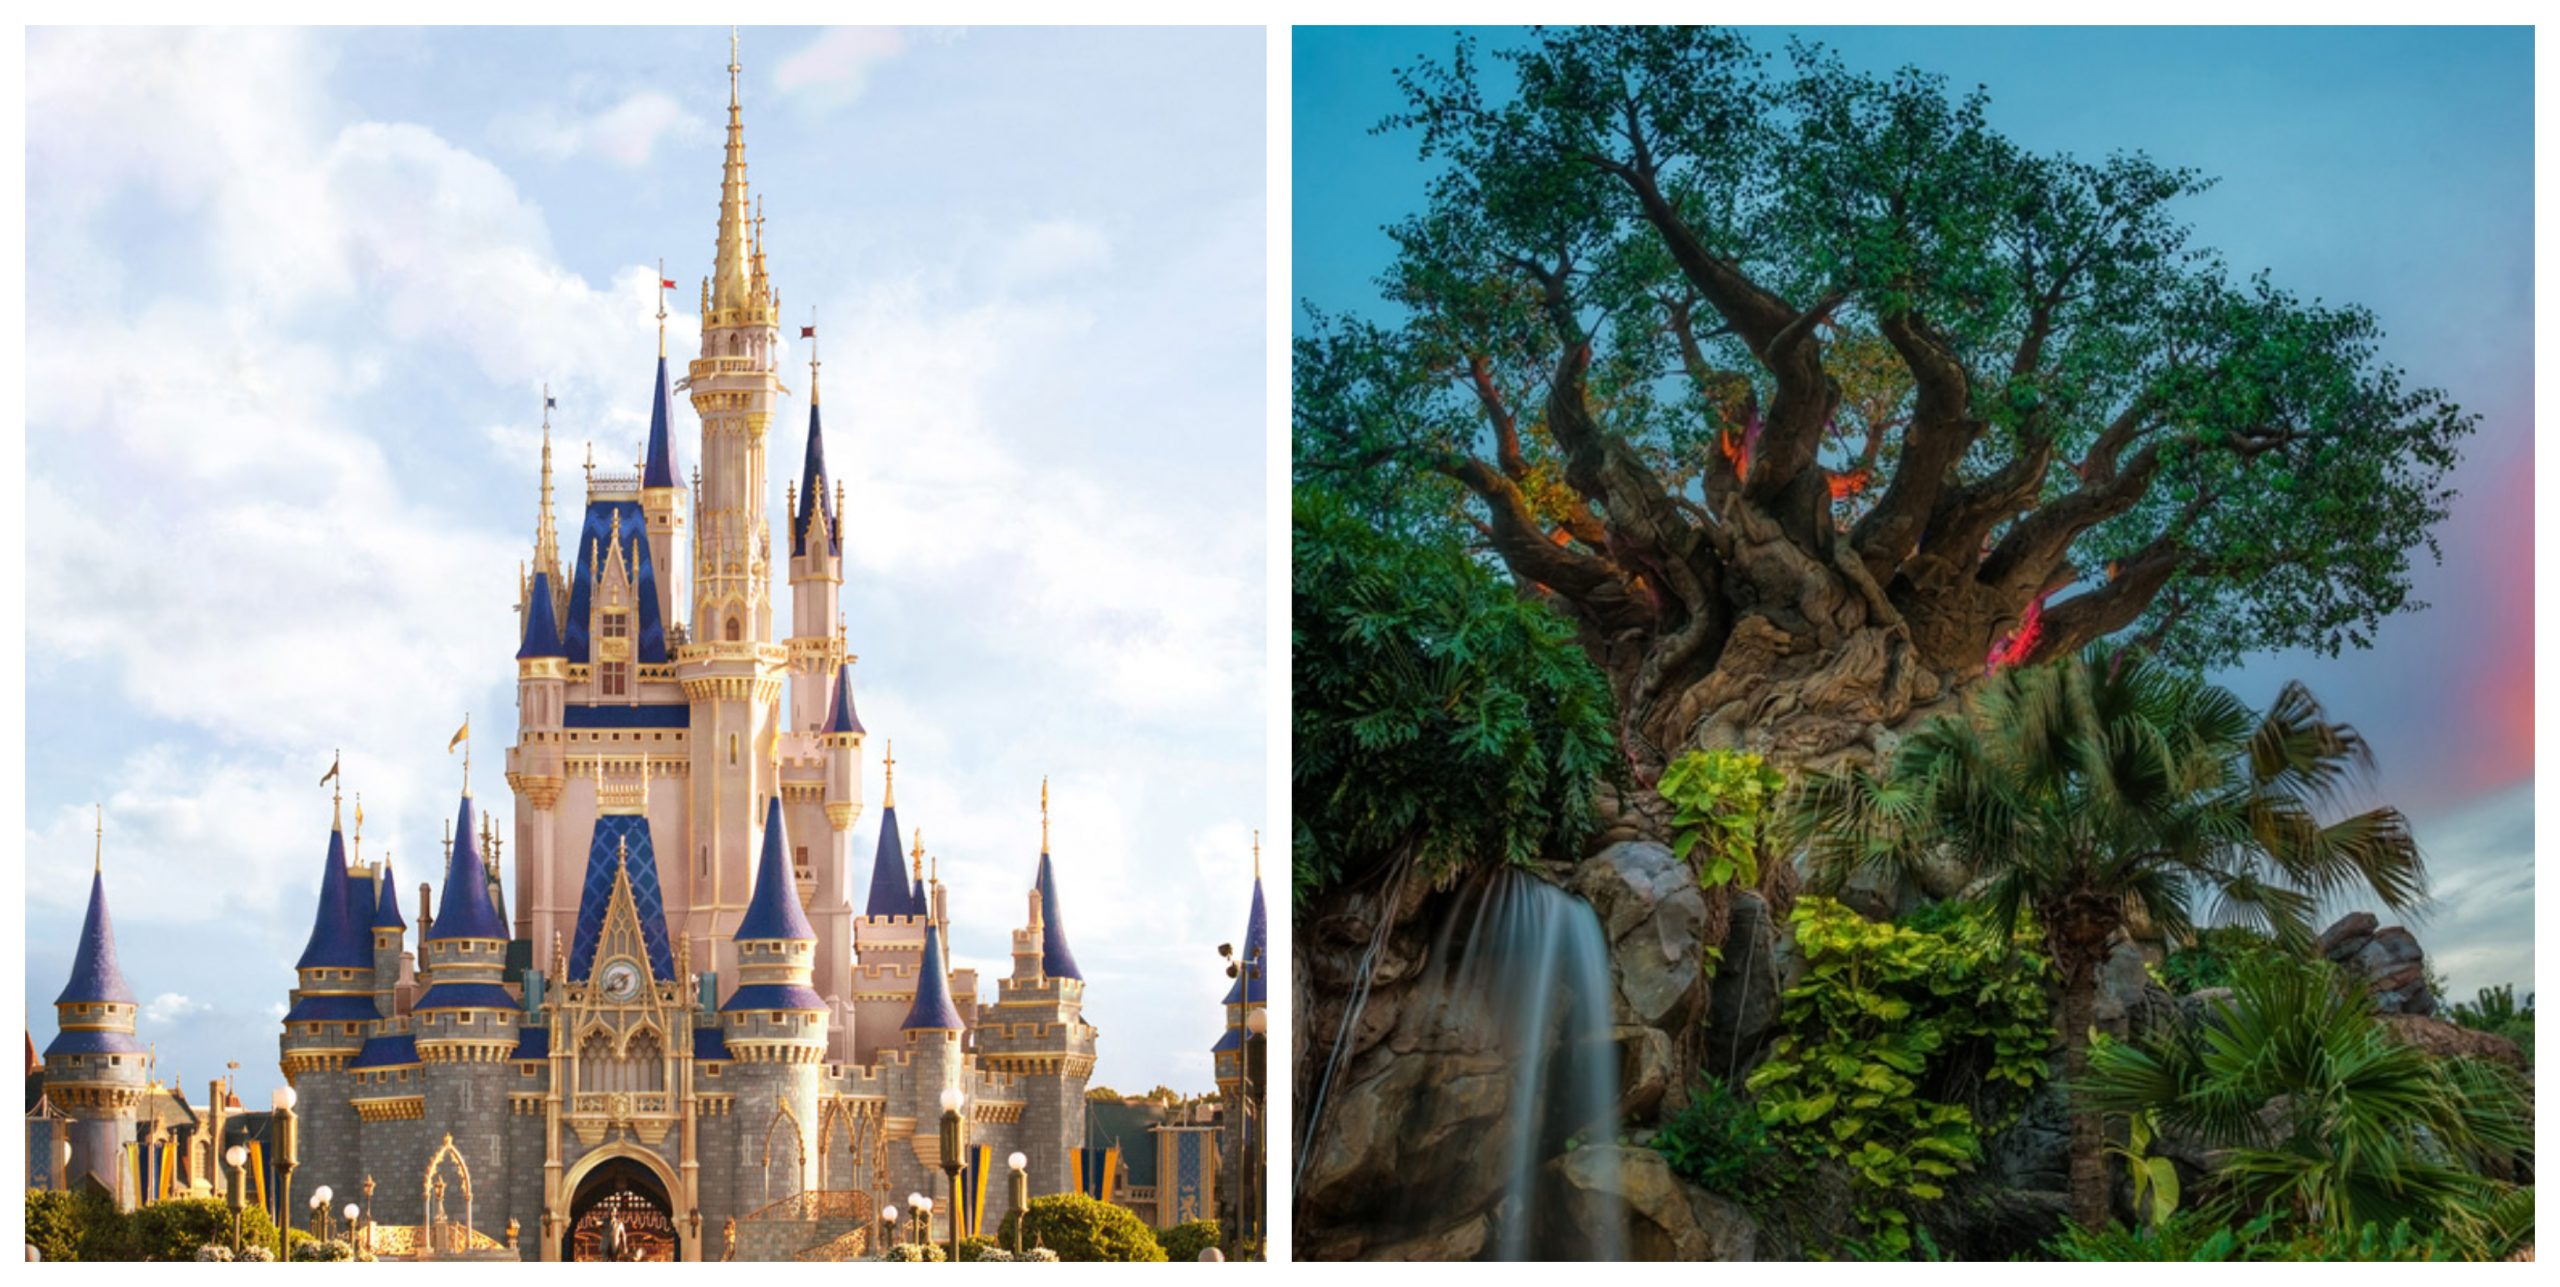 Relaxation Station locations for the Magic Kingdom and the Animal